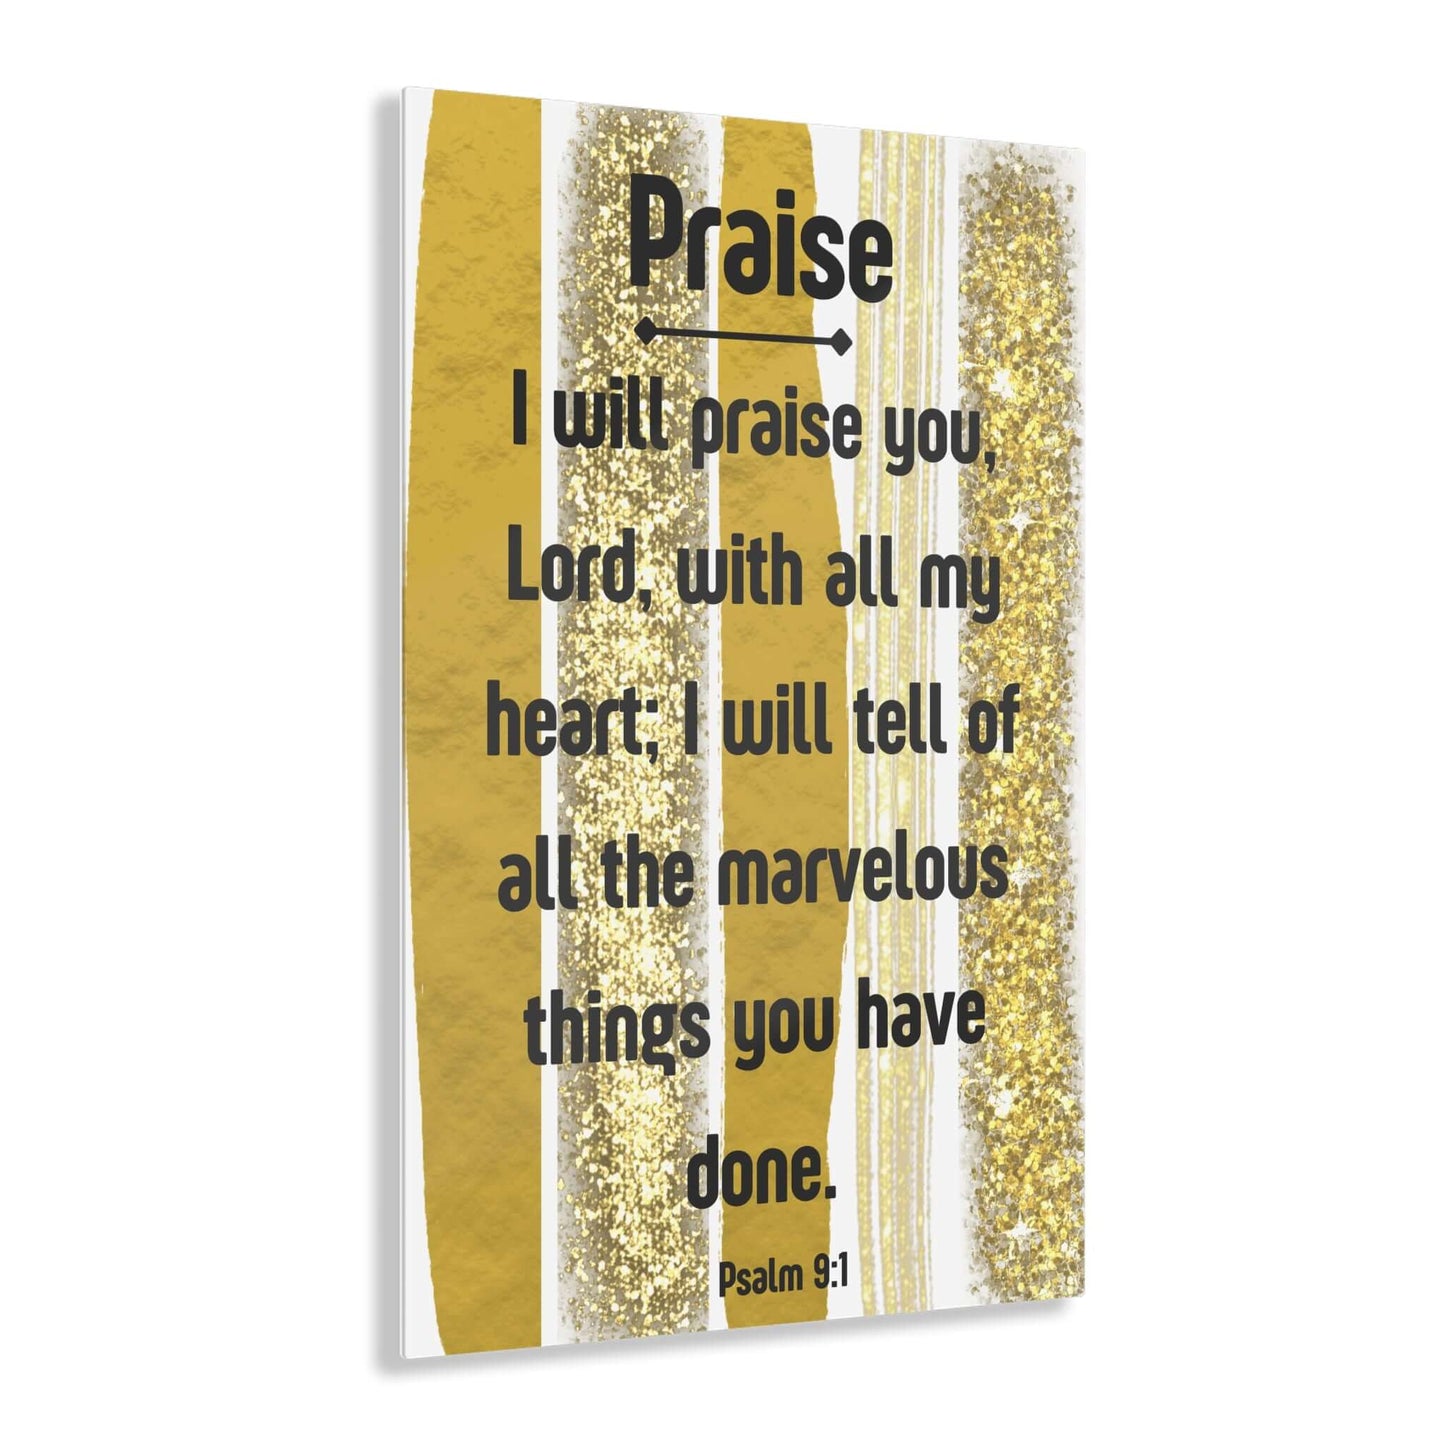 Gold Mirror Wall Decor - Acrylic Print with Inspirational Scripture | Art & Wall Decor,Assembled in the USA,Assembled in USA,Decor,Home & Living,Home Decor,Indoor,Made in the USA,Made in USA,Poster